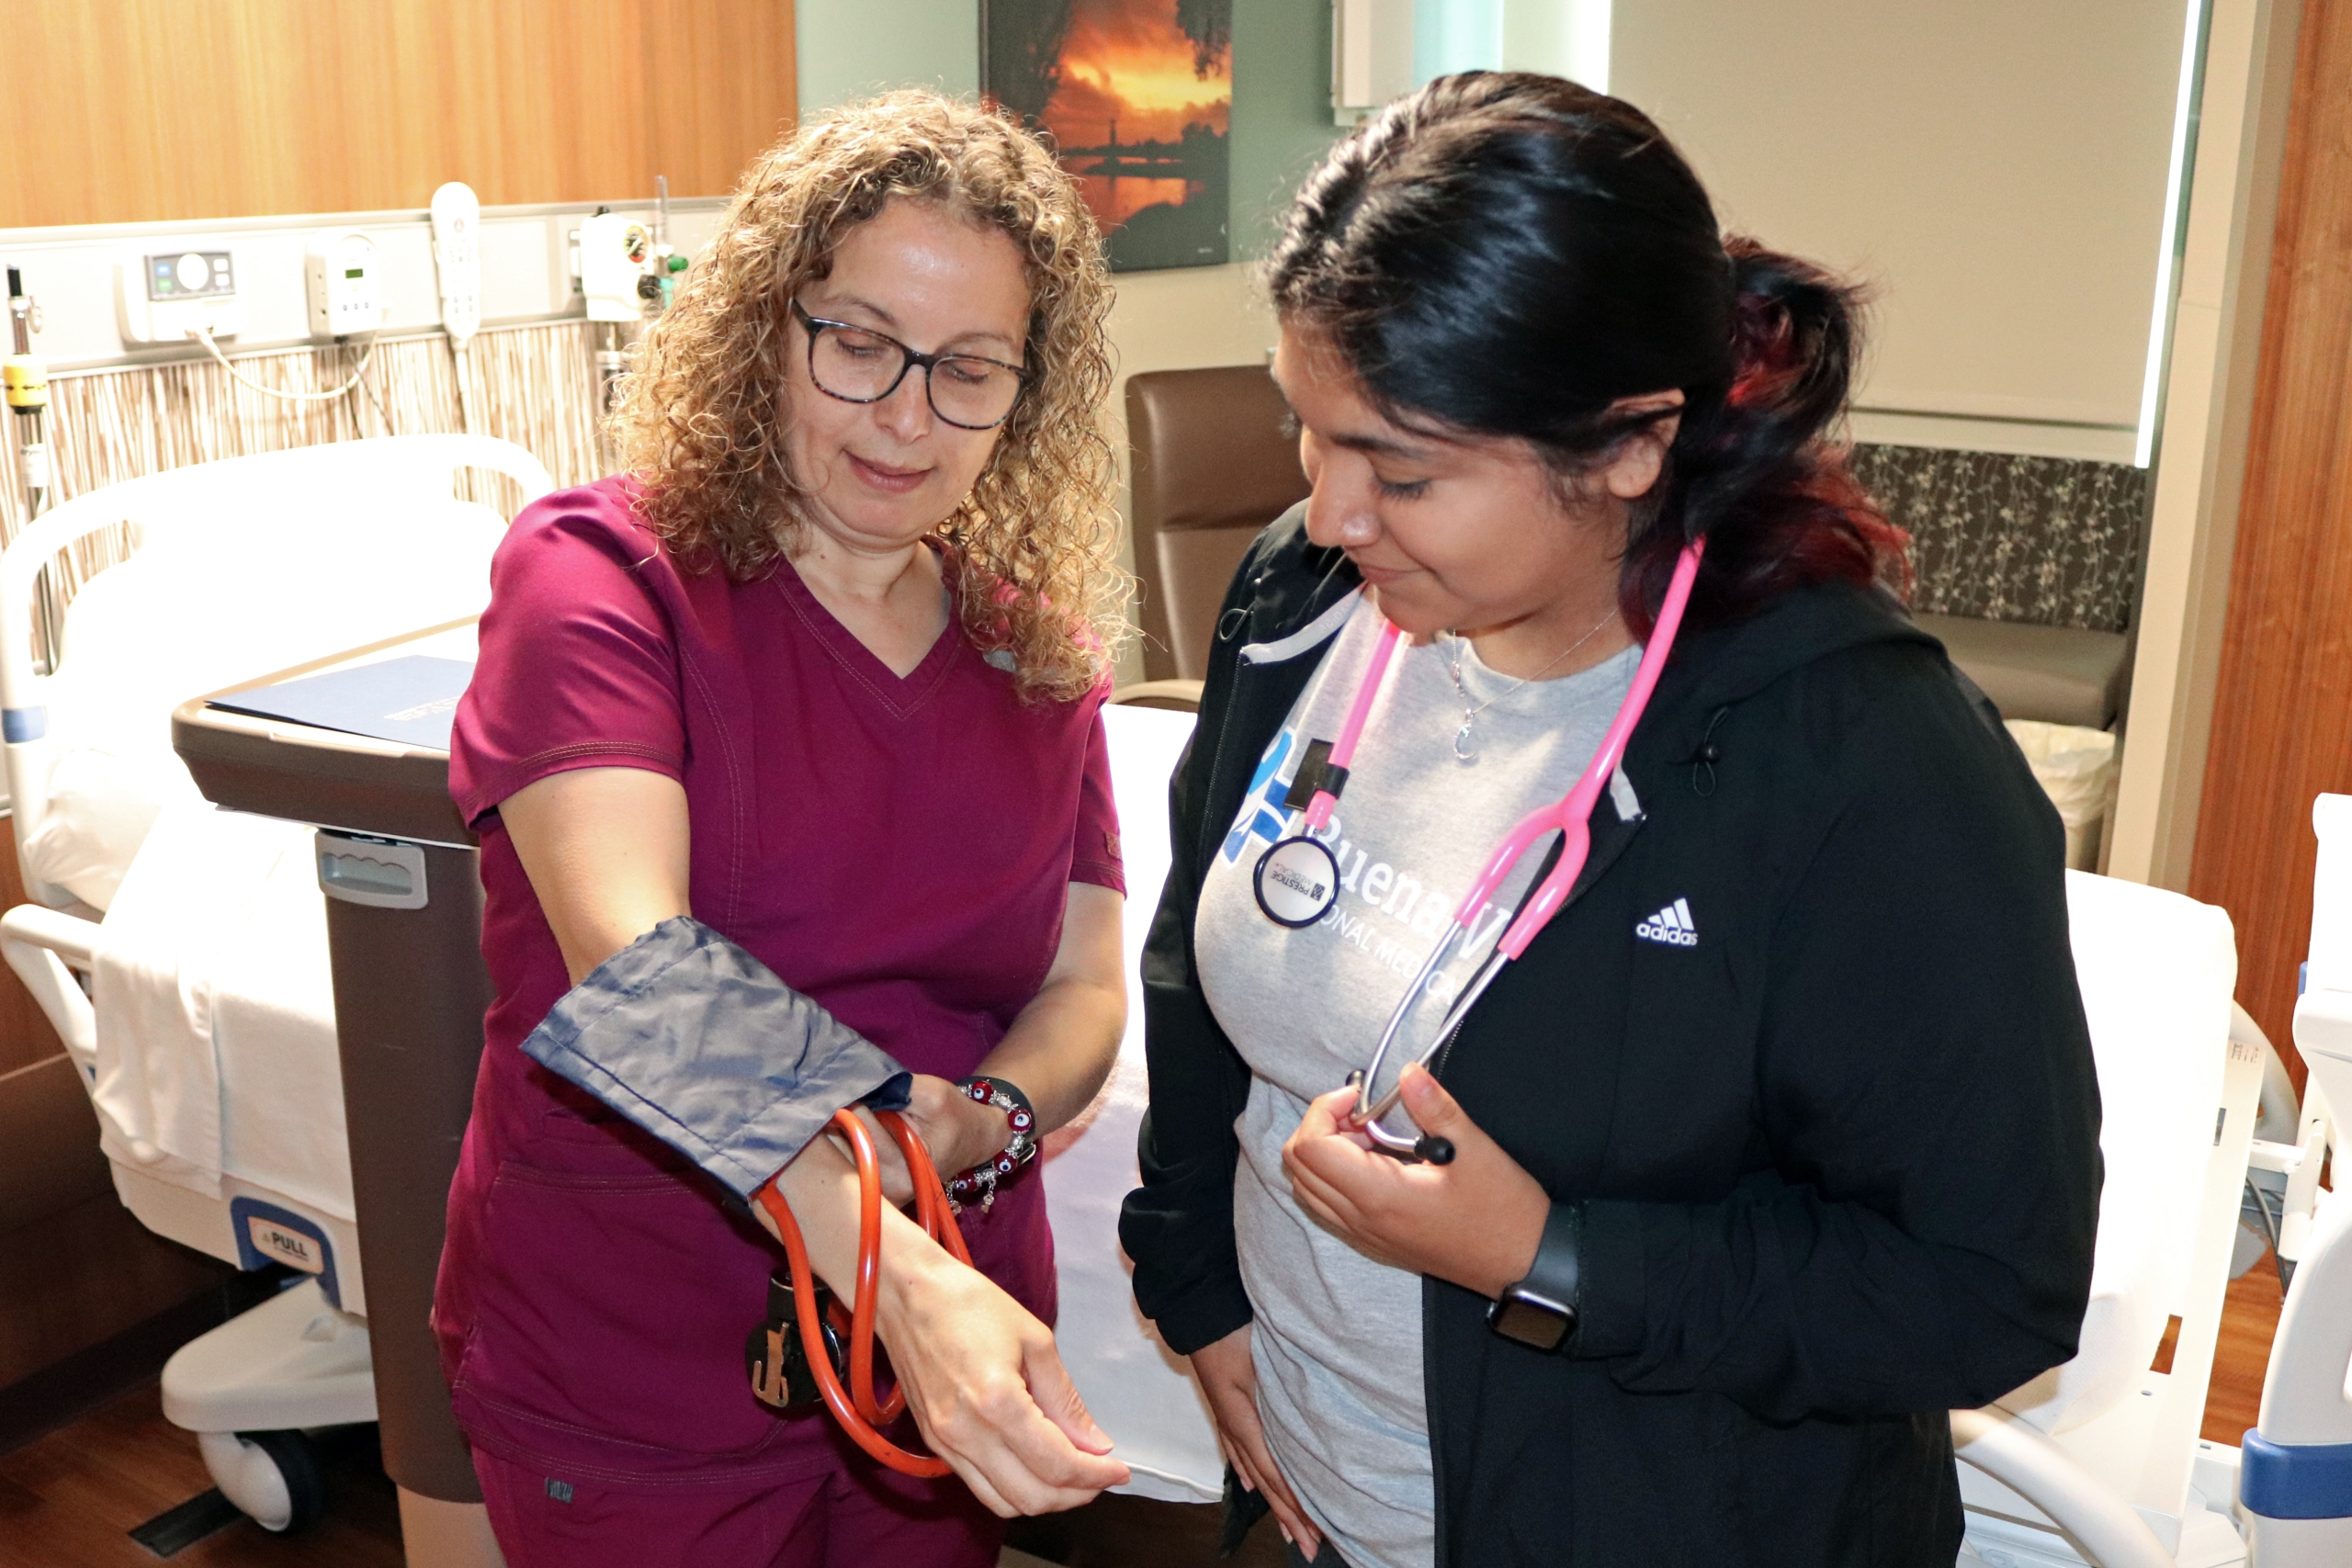 BVRMC CNA demonstrates a blood pressure tool to a high school student intern